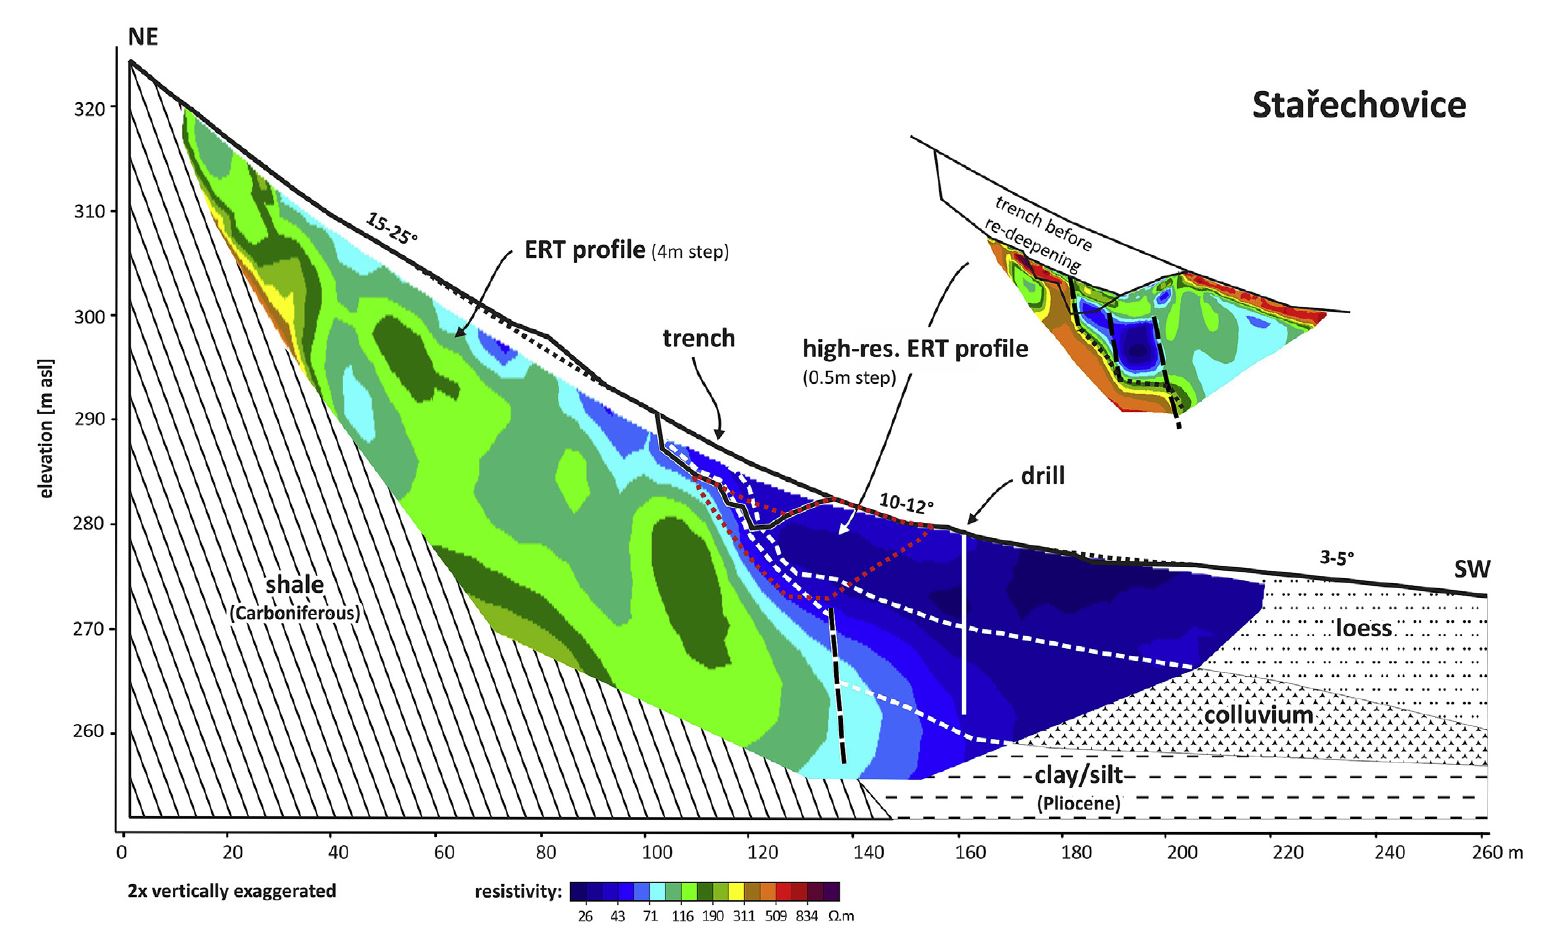 Stařechovice profile with ERT, interpreted geology and position of the trench. Note vertical exaggeration. From Špaček et al. 2017.